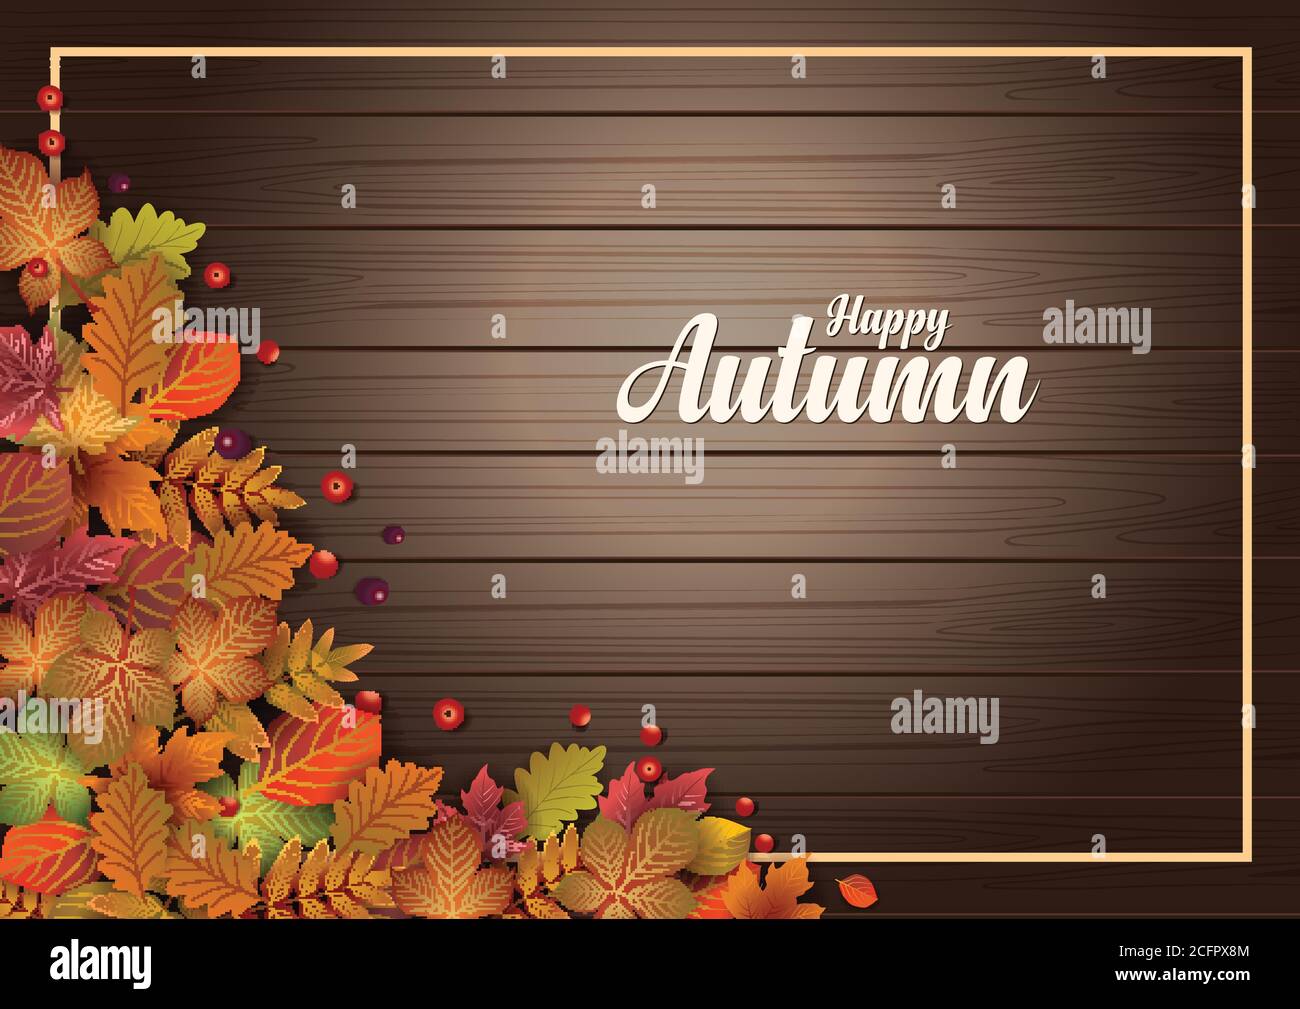 Autumn stylish wood background decorate with leaves and fruits. shopping sale web banner.Vector illustration poster template. Stock Vector